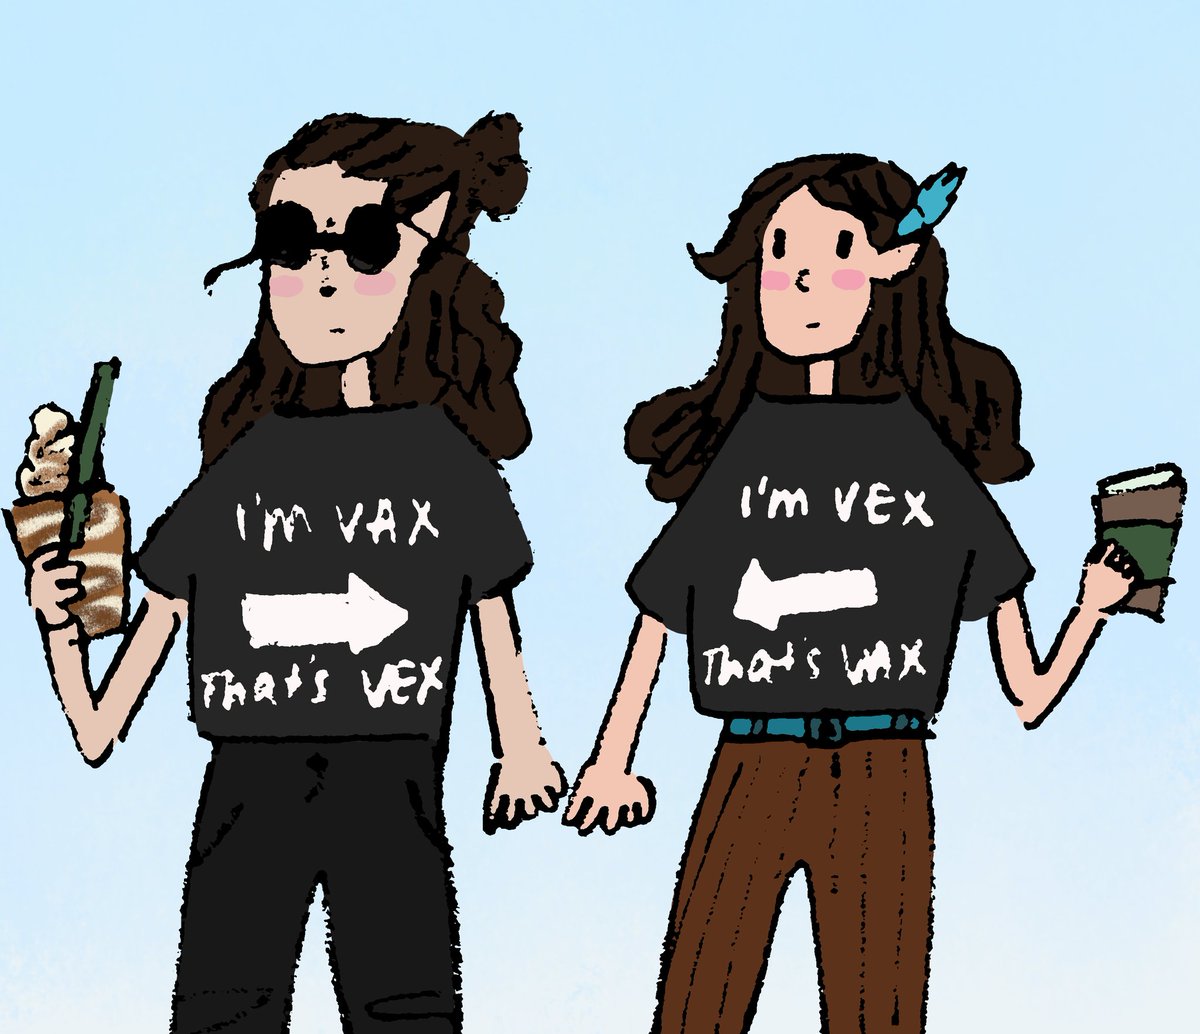 shows up 8 years late to critical role with iced coffee ✌️ #voxmachina